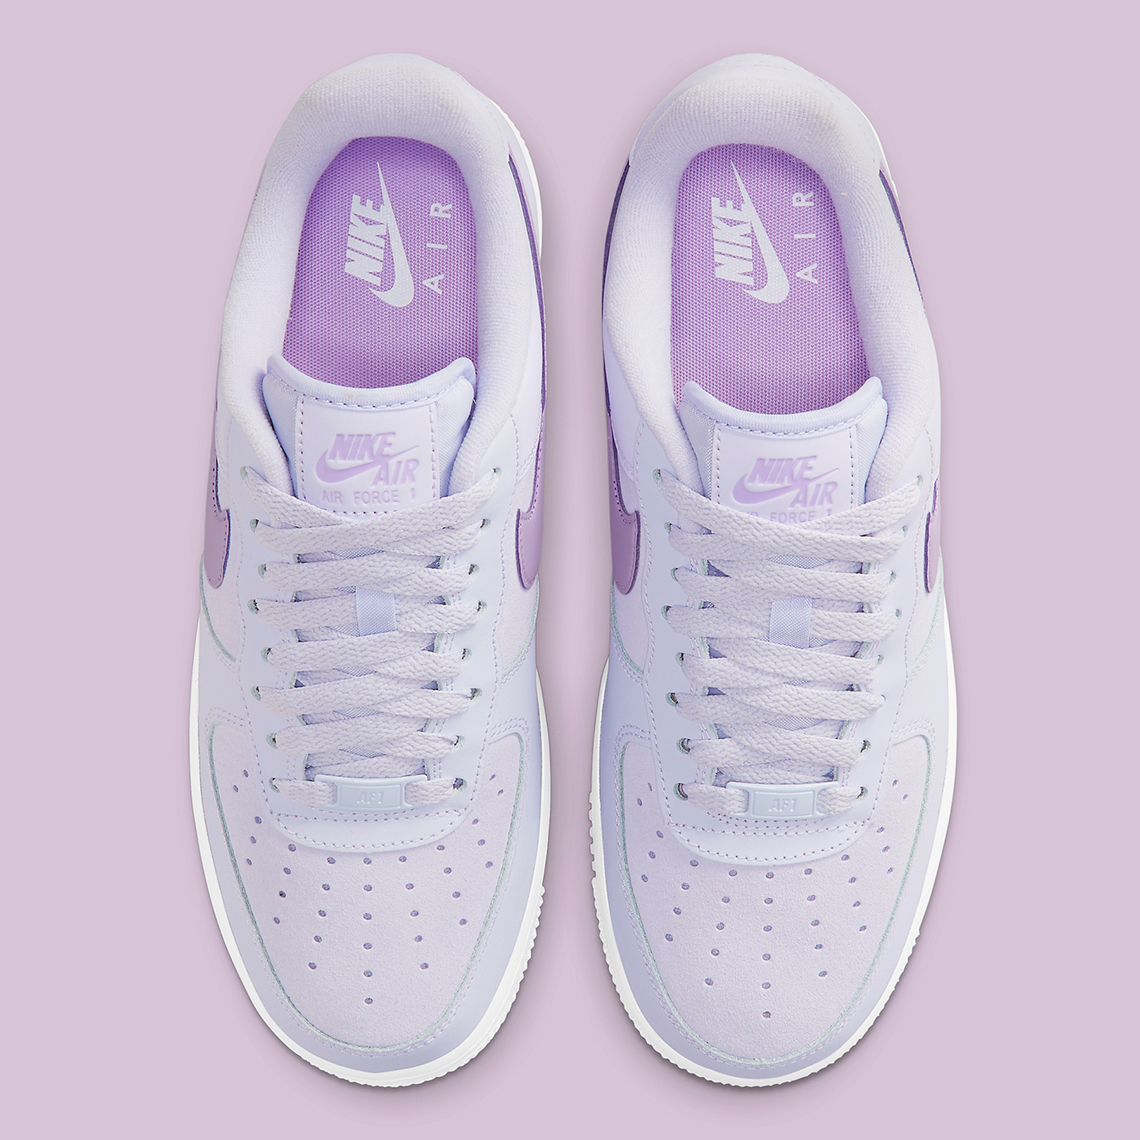 chaussure nike air force 1 femme violet